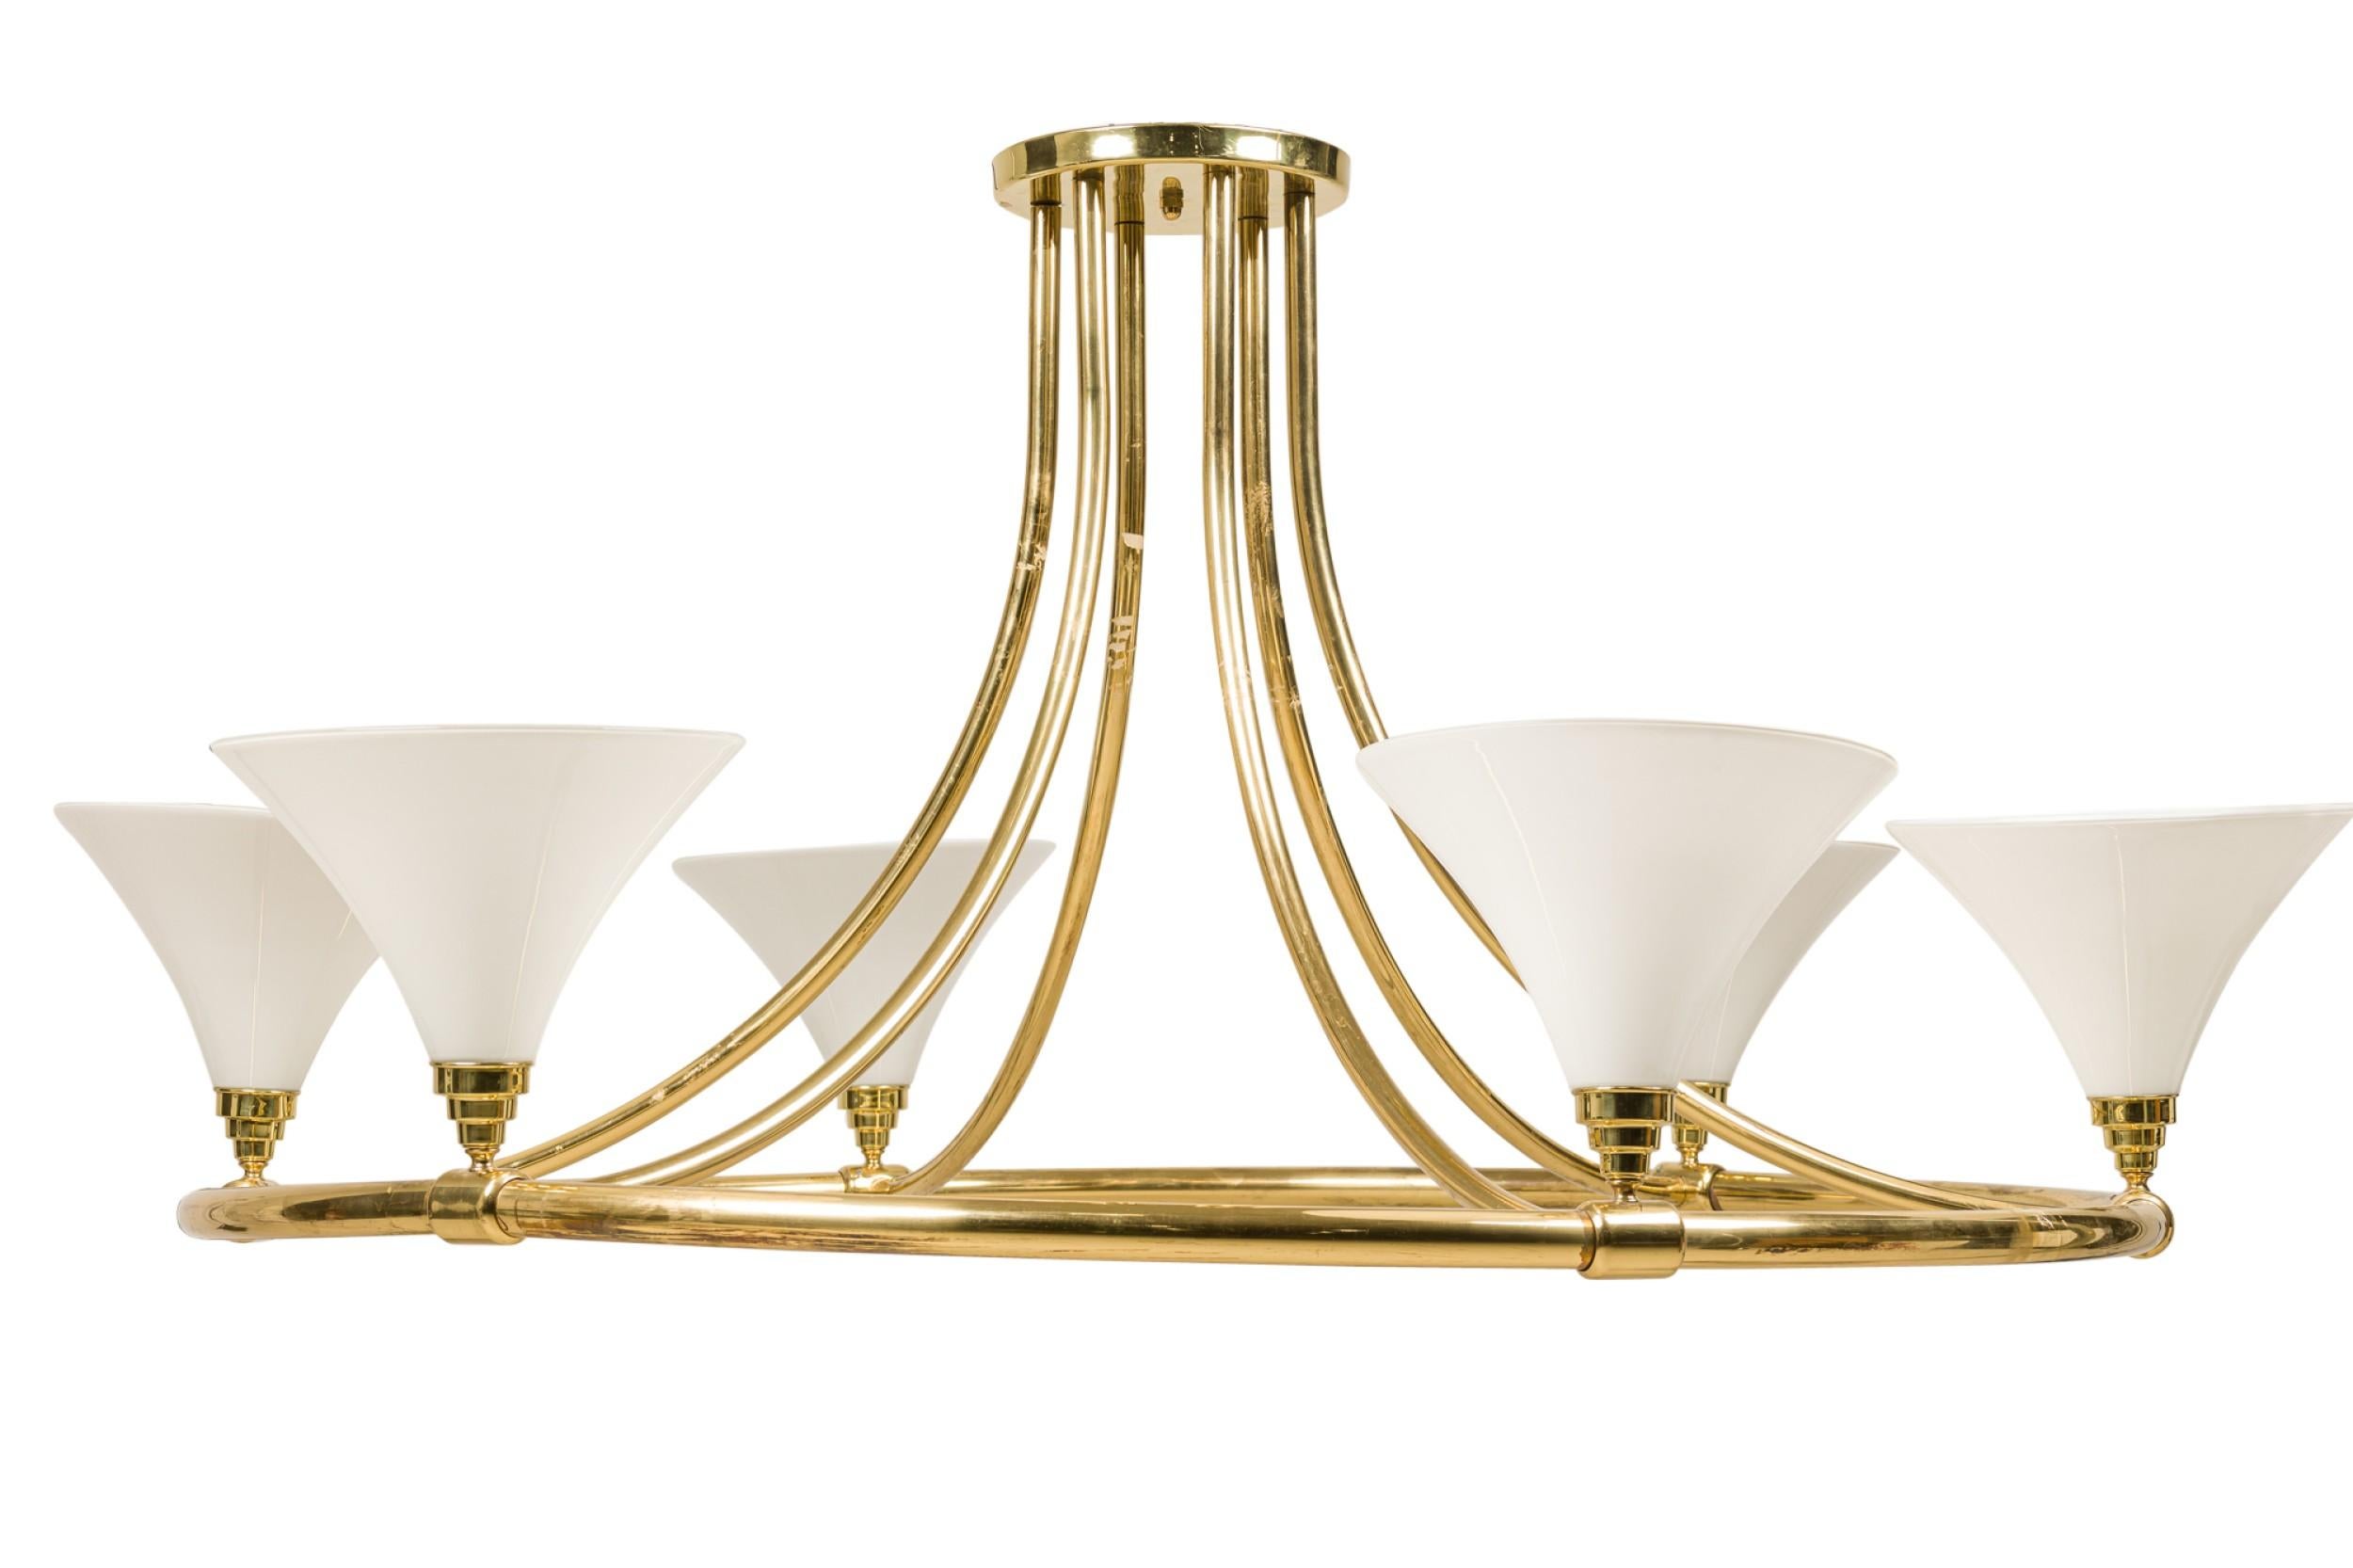 Continental Mid-Century monumental circular shaped 6-light chandelier with a polished brass frame and 6 tulip-form white glass shades.